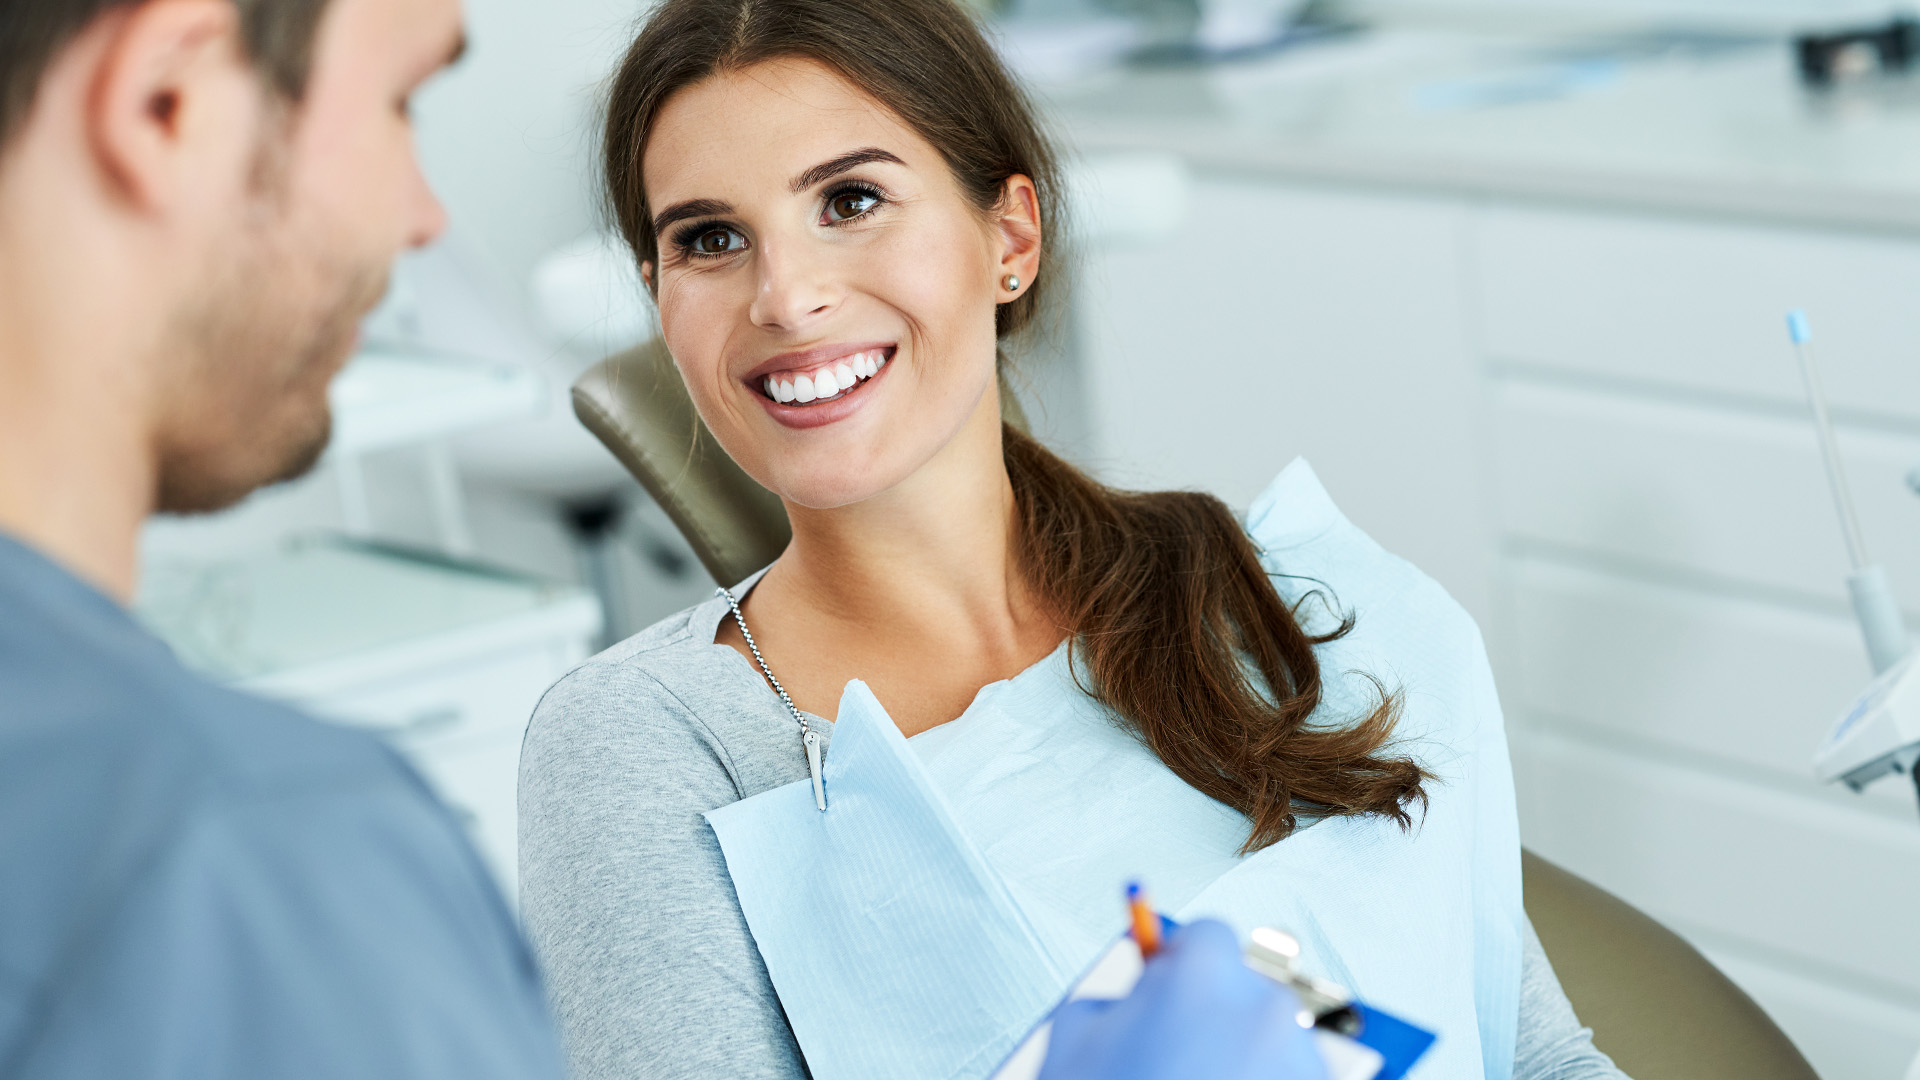 Middle Georgia Oral and Maxillofacial Surgery | Extractions, Sedation Dentistry and Facial Cosmetic Services